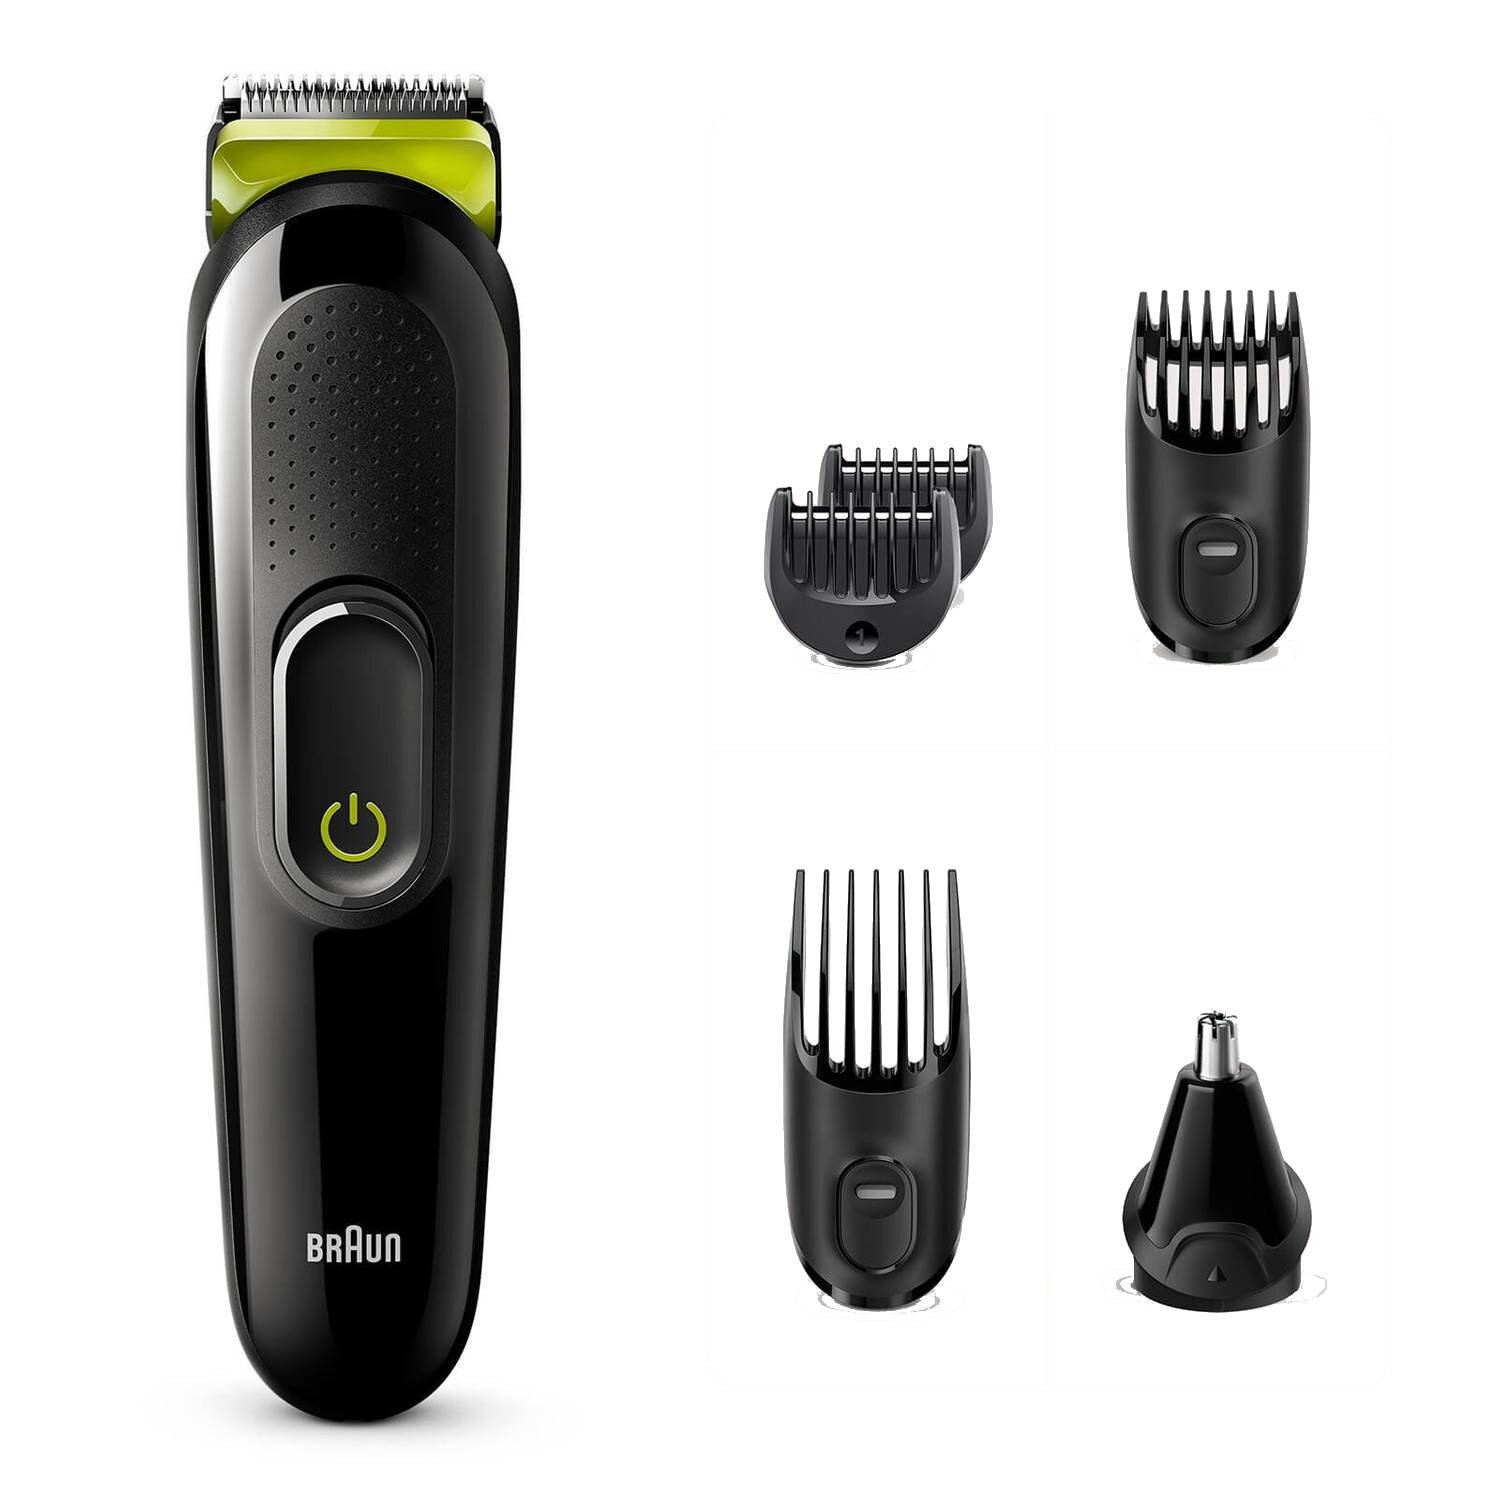 Buy Braun 6-in-1 Styling Kit with 5 Attachments - Volt Green online Worldwide Tejar.com